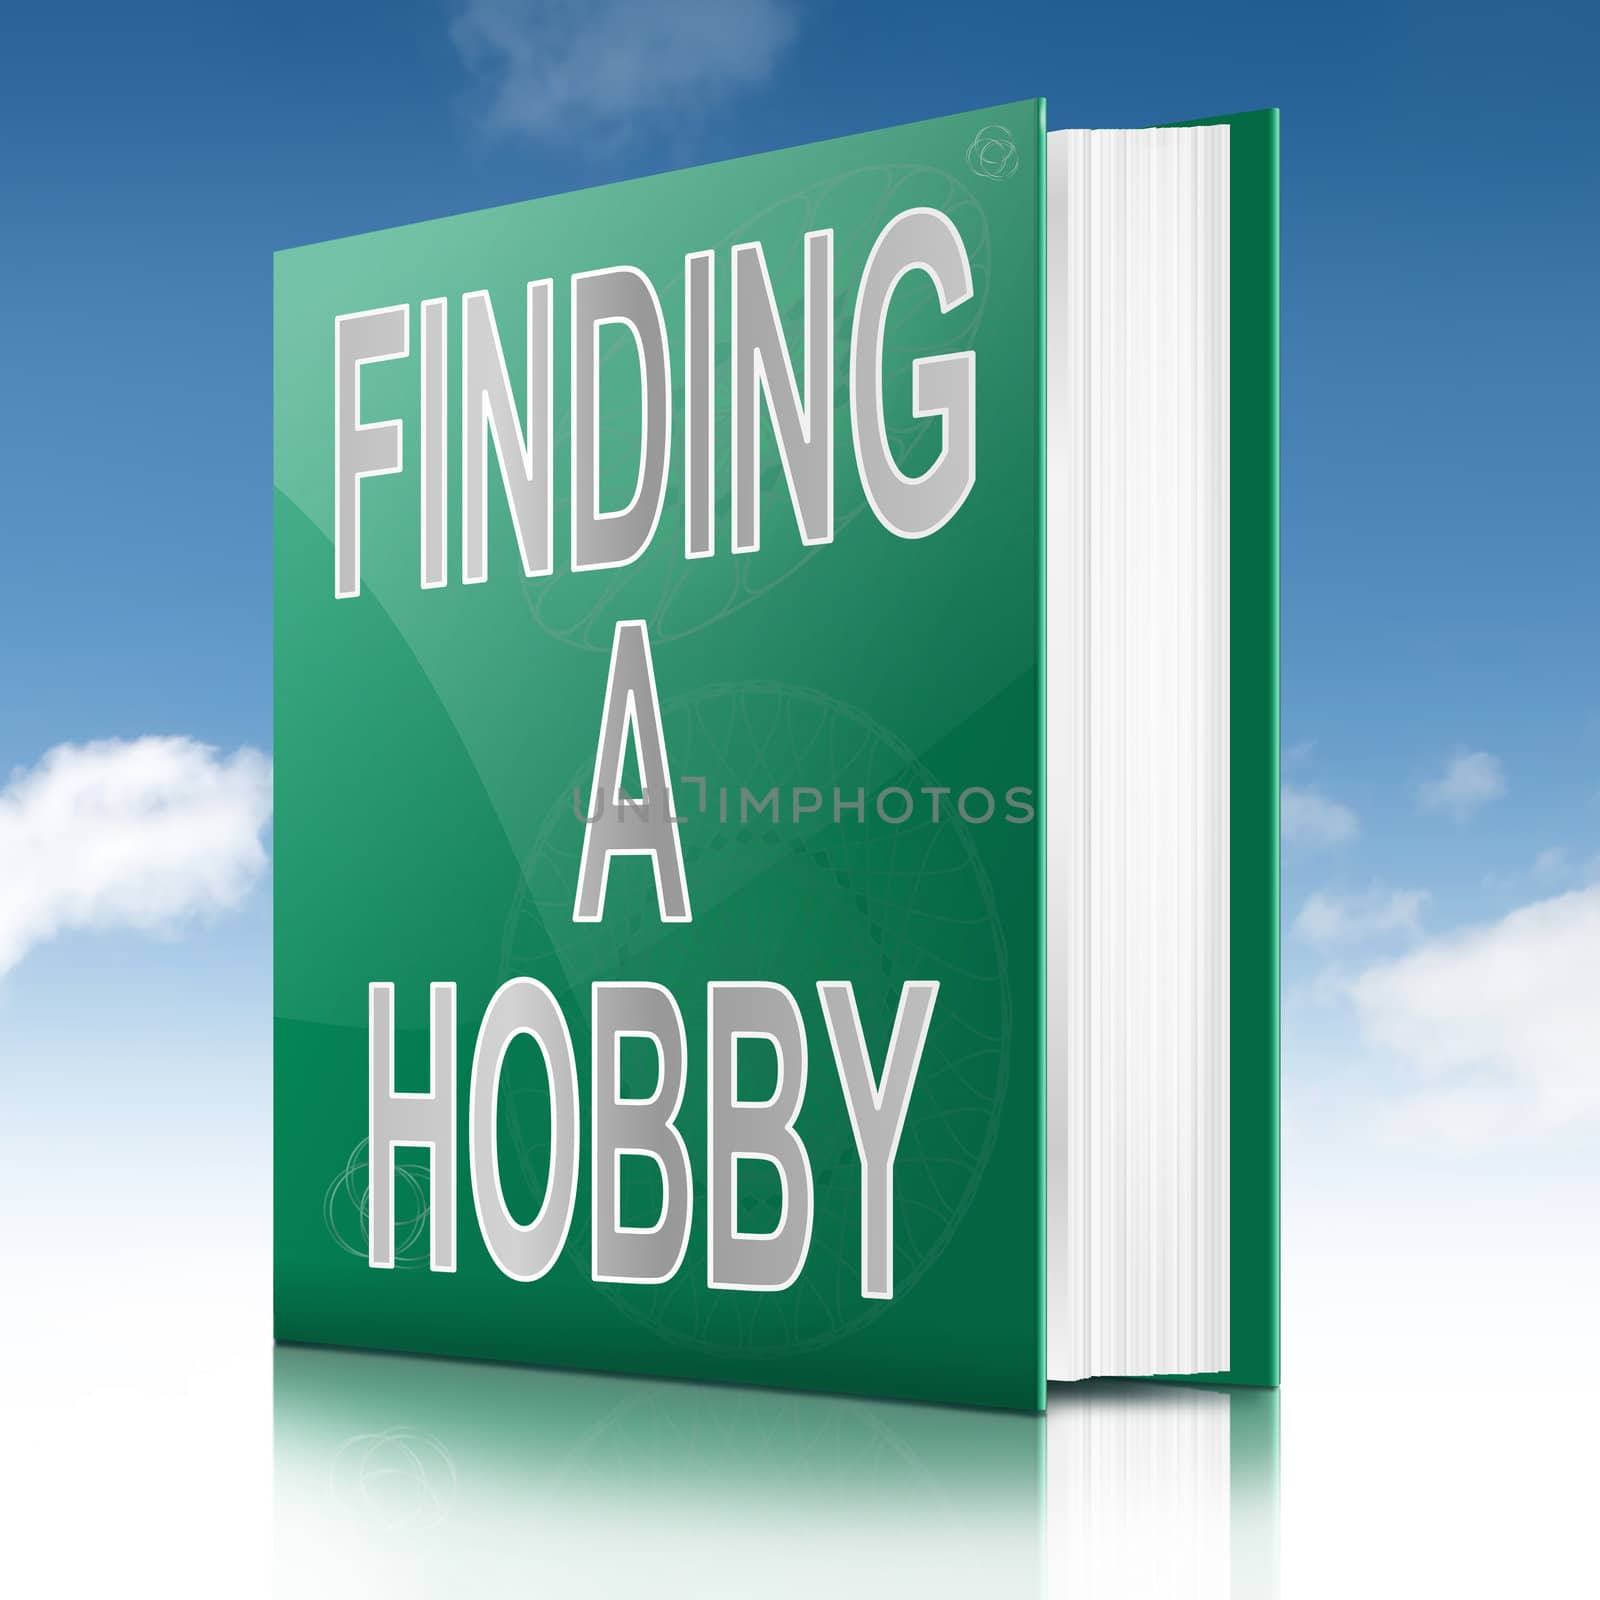 Illustration depicting a book with a finding a hobby concept title. Sky background.